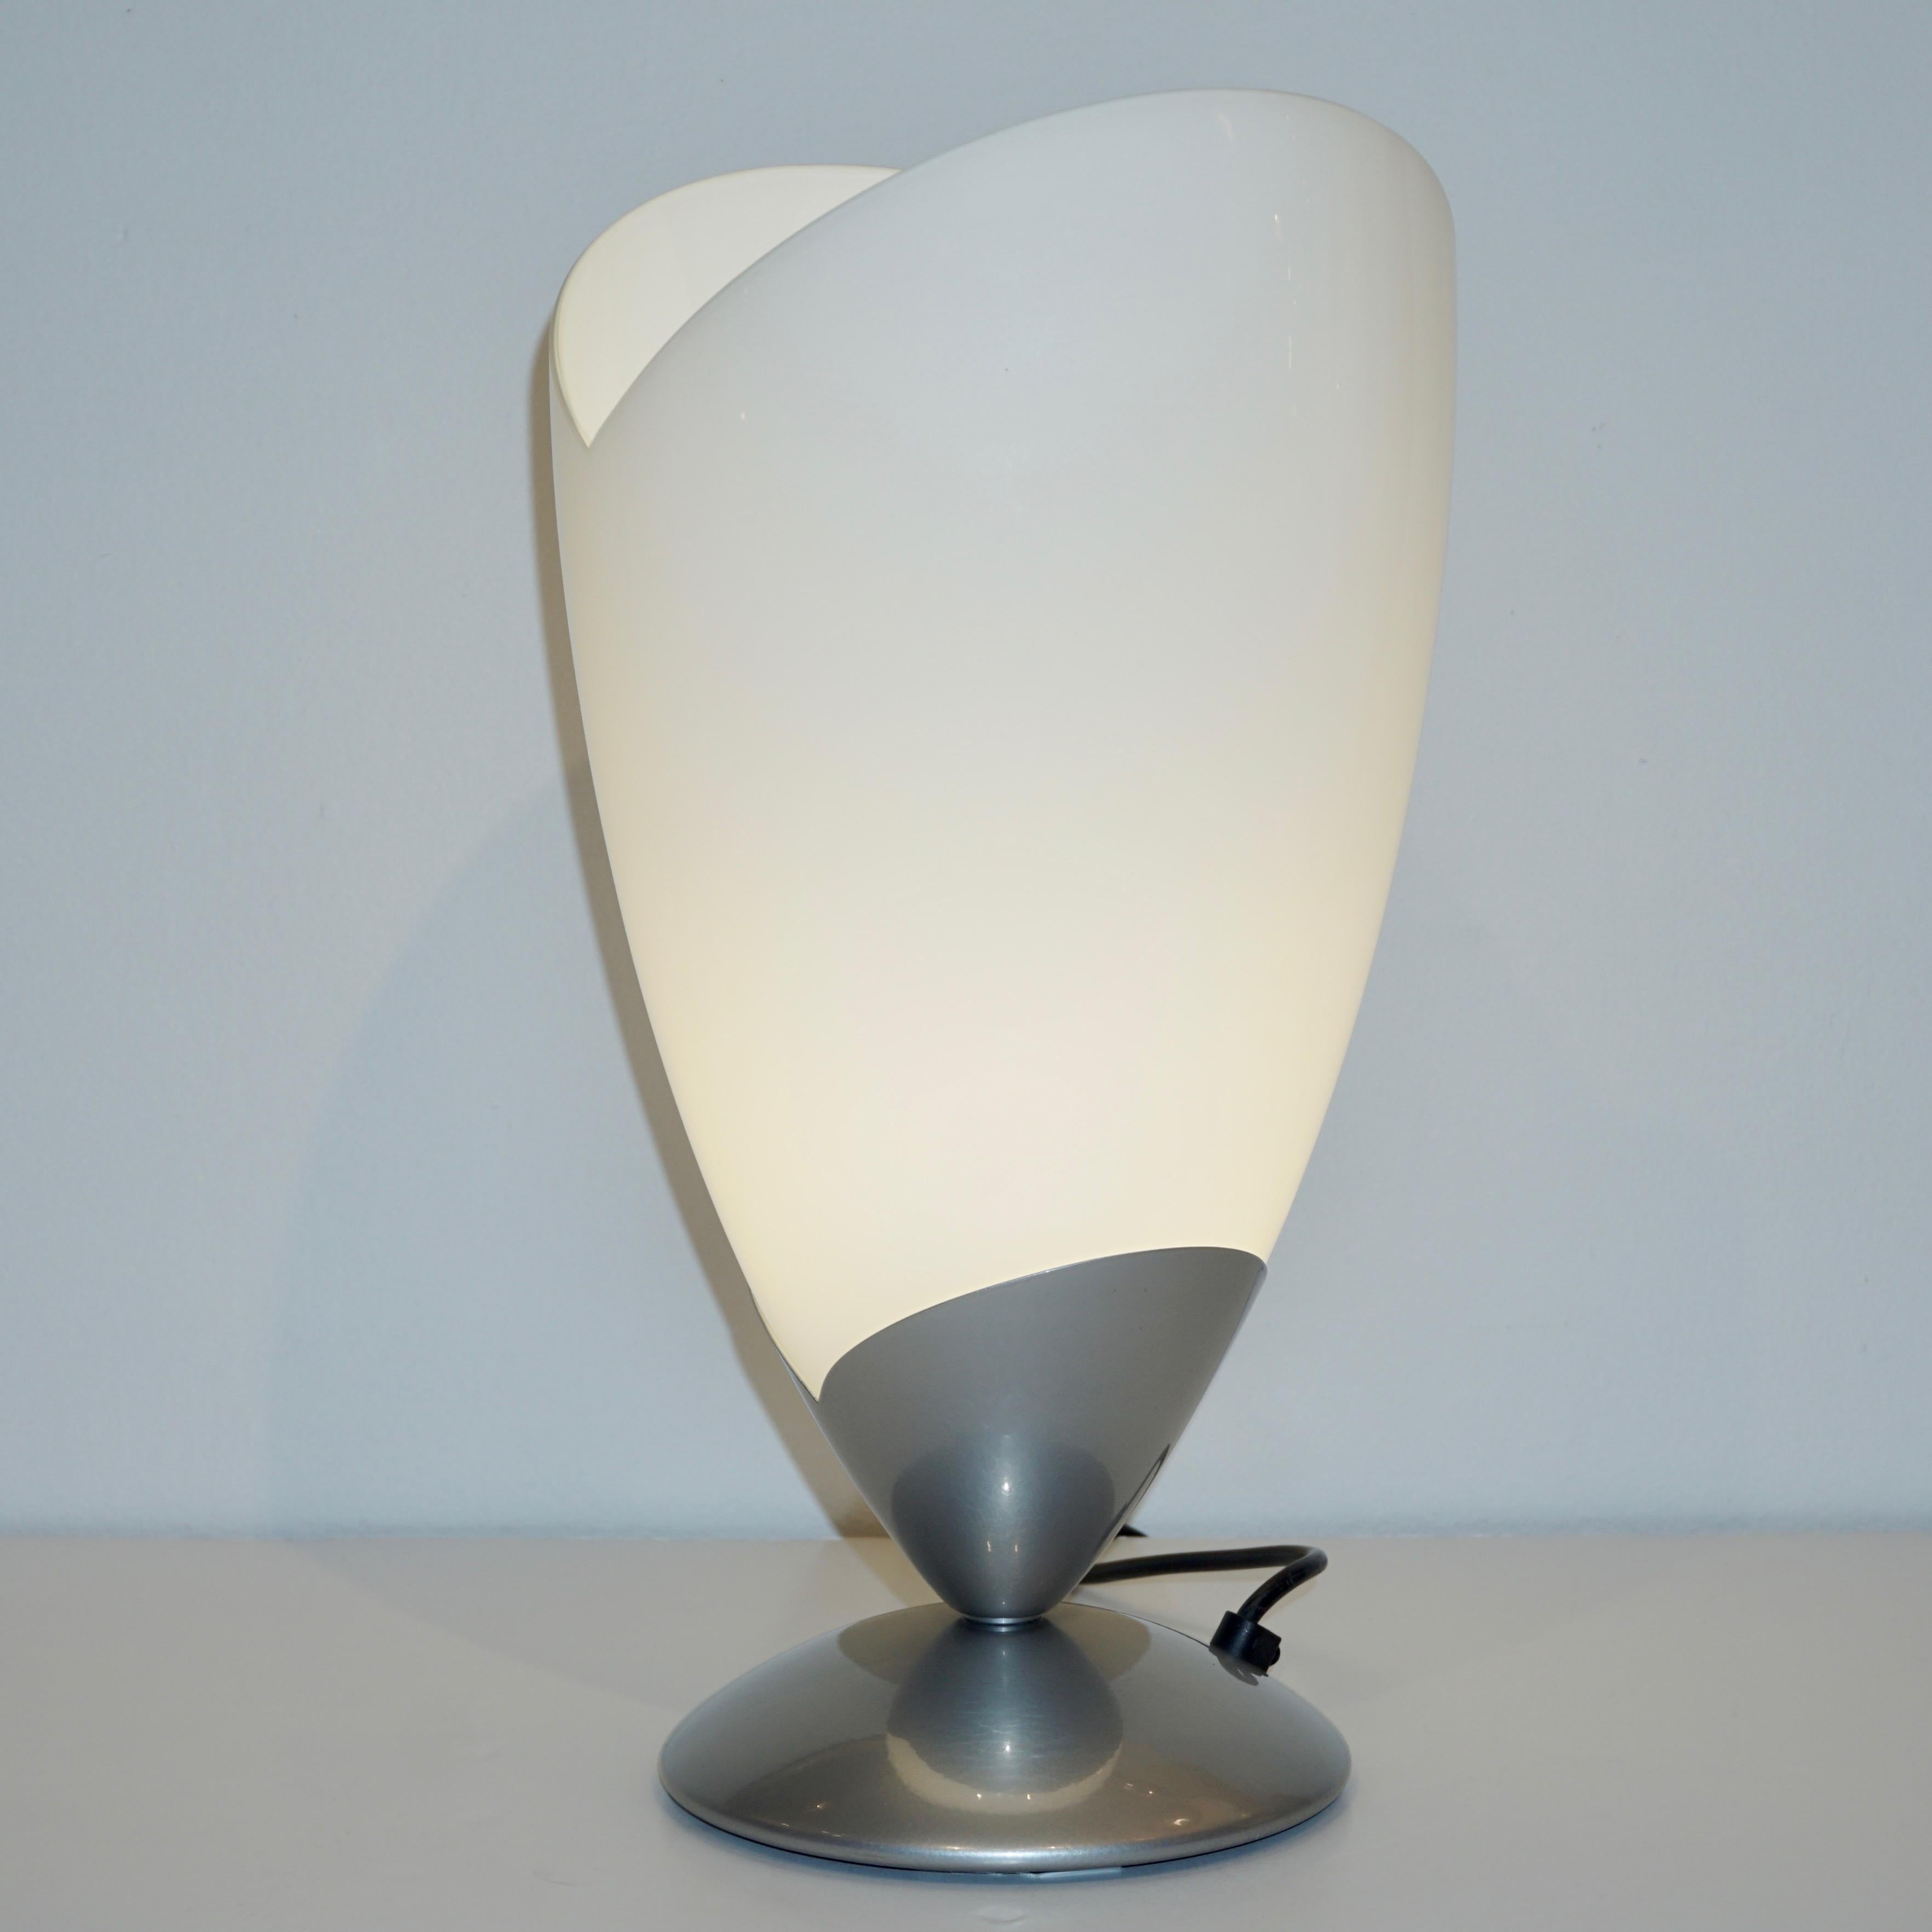 Late 20th Century 1970s Italian Pair of Satin Nickel & White Glass Organic Tulip Lamps by Tronconi For Sale